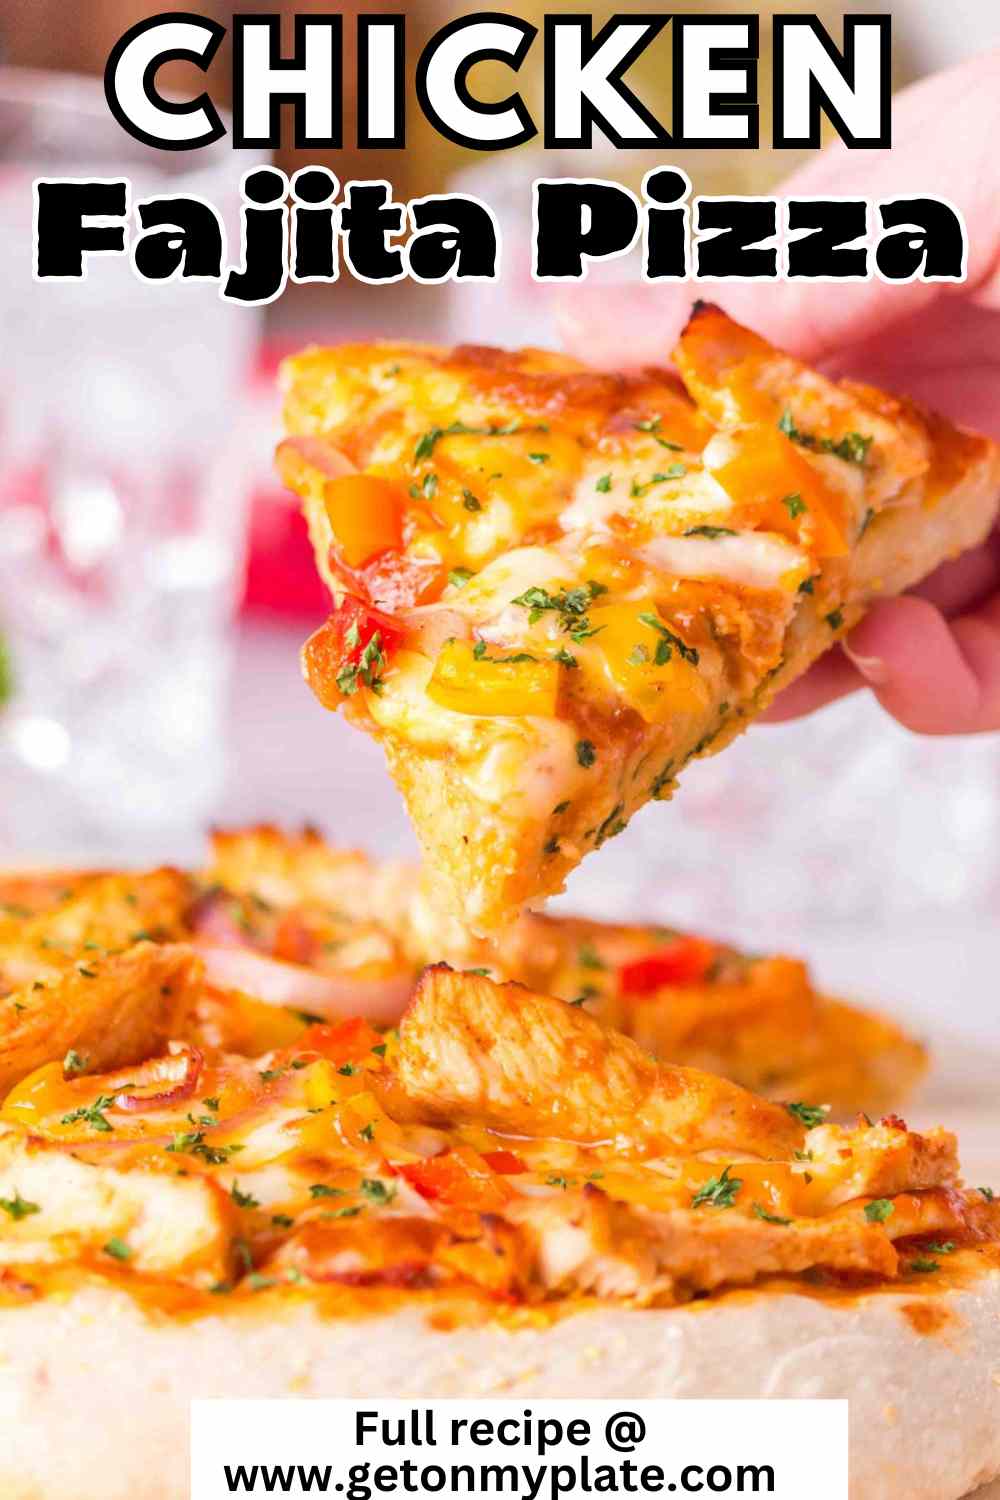 Pinterest pin for chicken fajita pizza. A slice of pizza with a cheese pull.